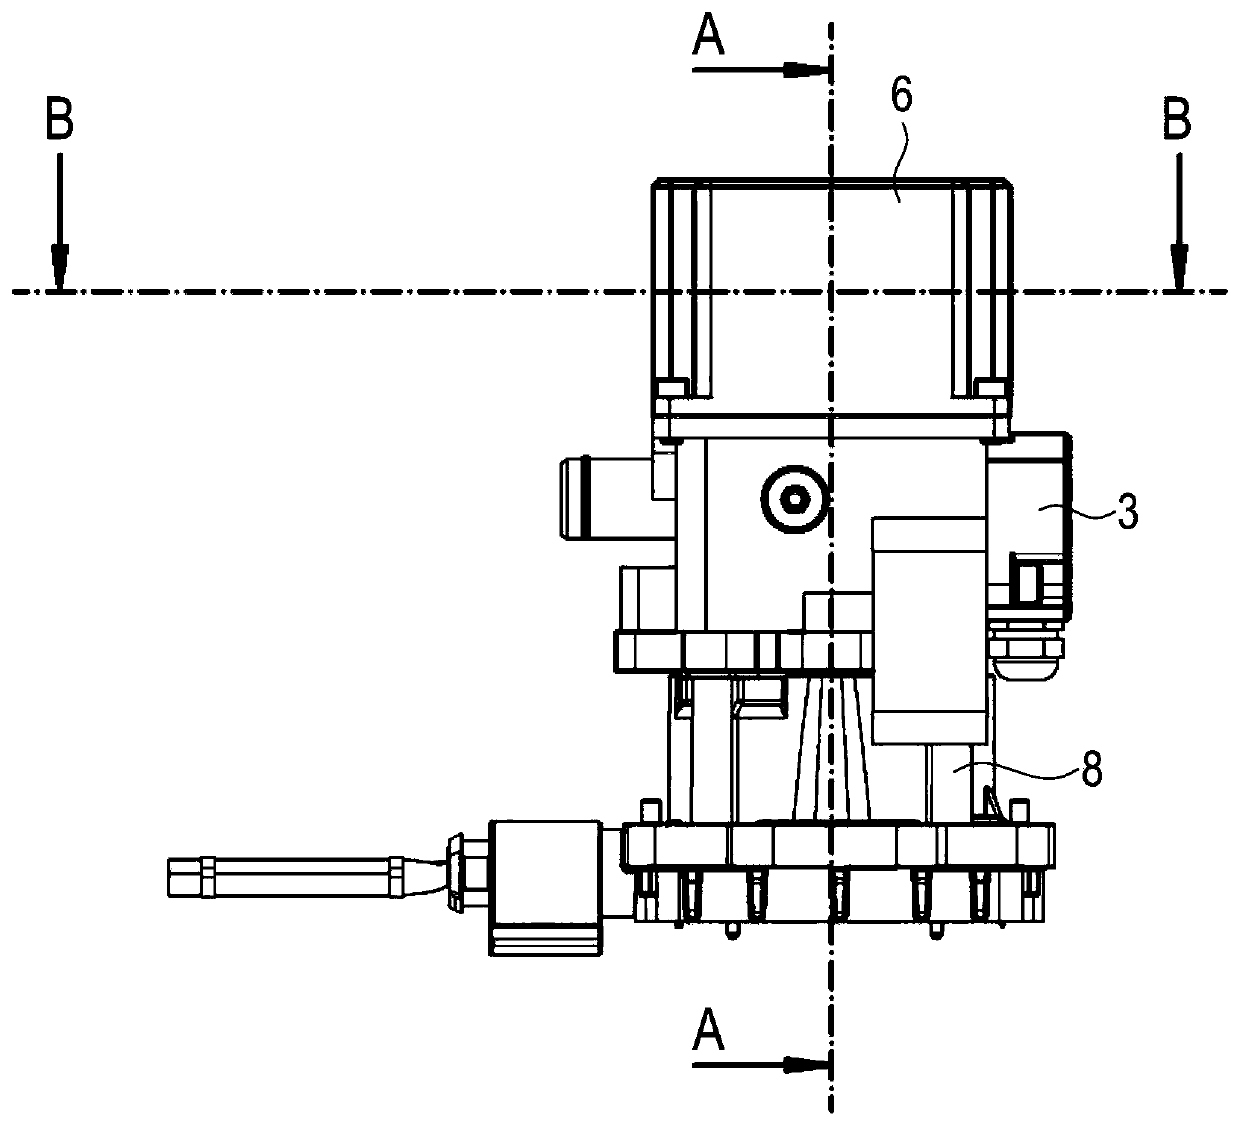 Pump unit for providing a hydraulic pressure for actuating an actuator in the drive train of a motor vehicle